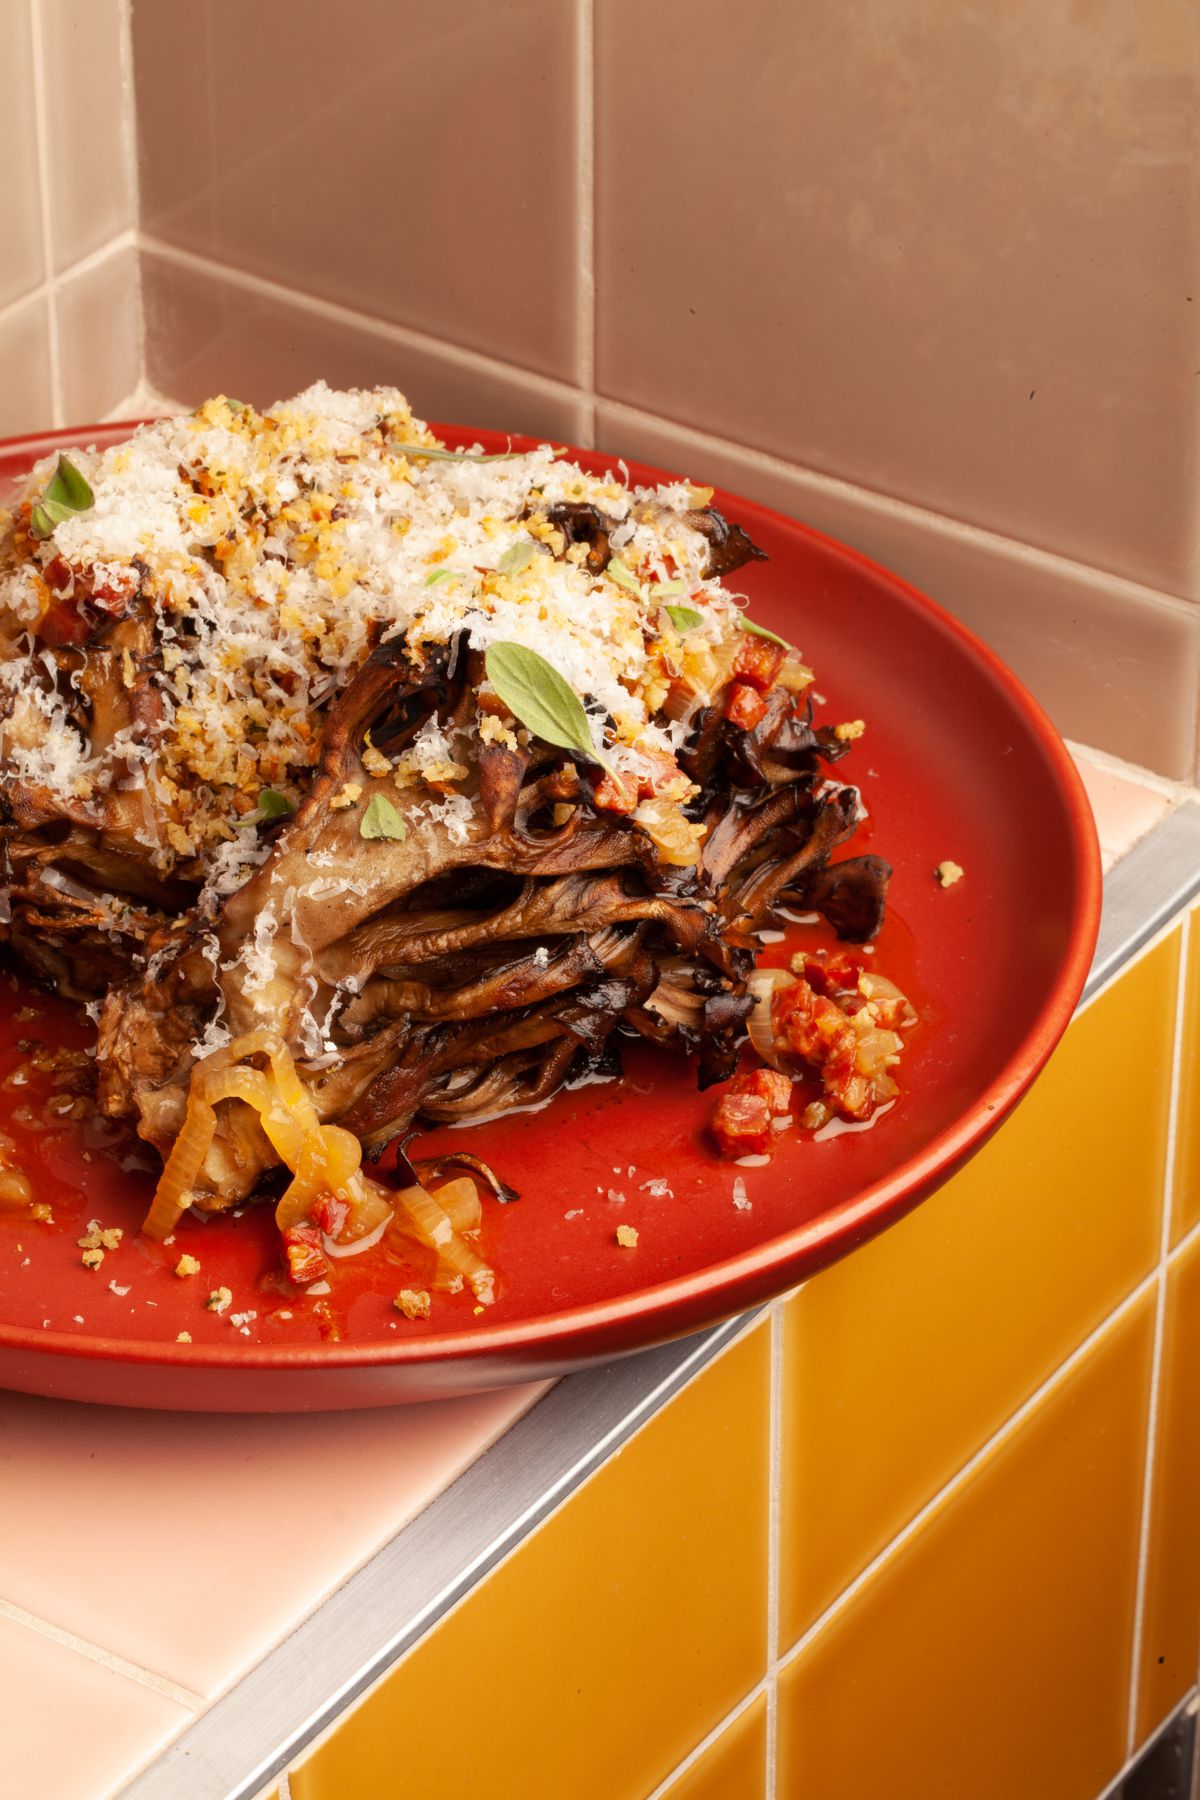 A red plate with large roasted mushroom pieces placed on top, covered in cheese and other garnishes.